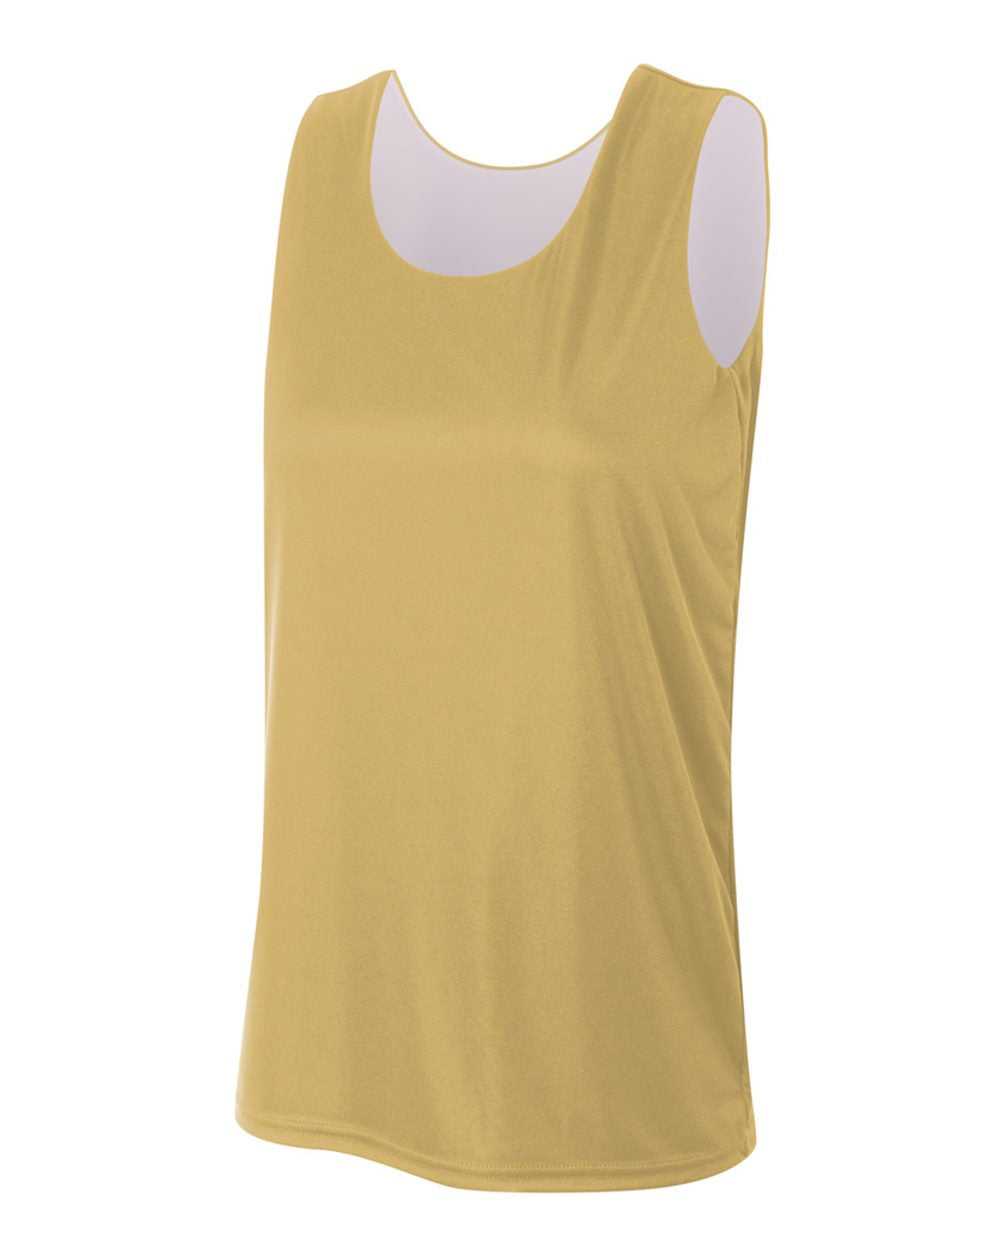 A4 NW2375 Women's Reversible Jump Jersey - Vegas Gold White - HIT a Double